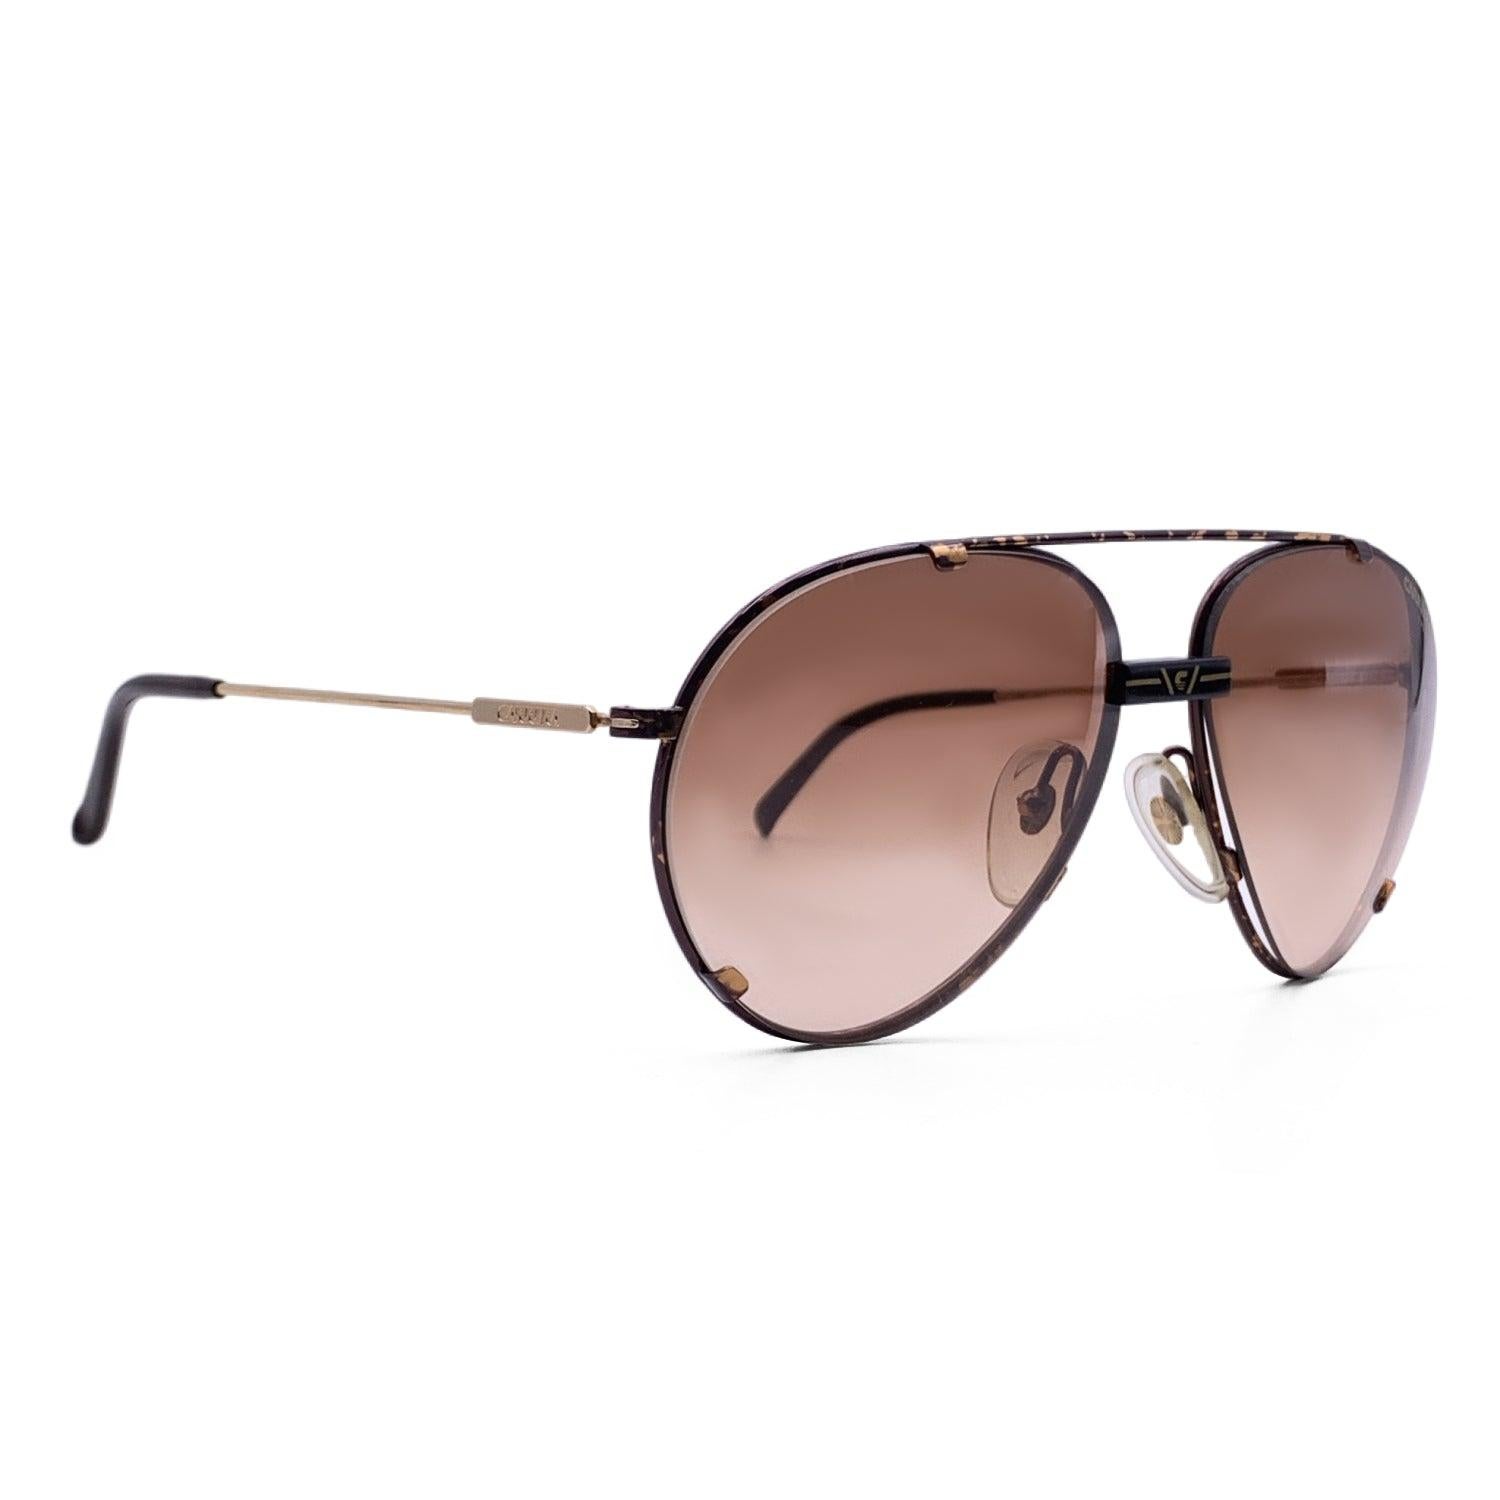 Carrera Vintage Aviator Sunglasses 5463 42 60/16 140mm In Excellent Condition For Sale In Rome, Rome